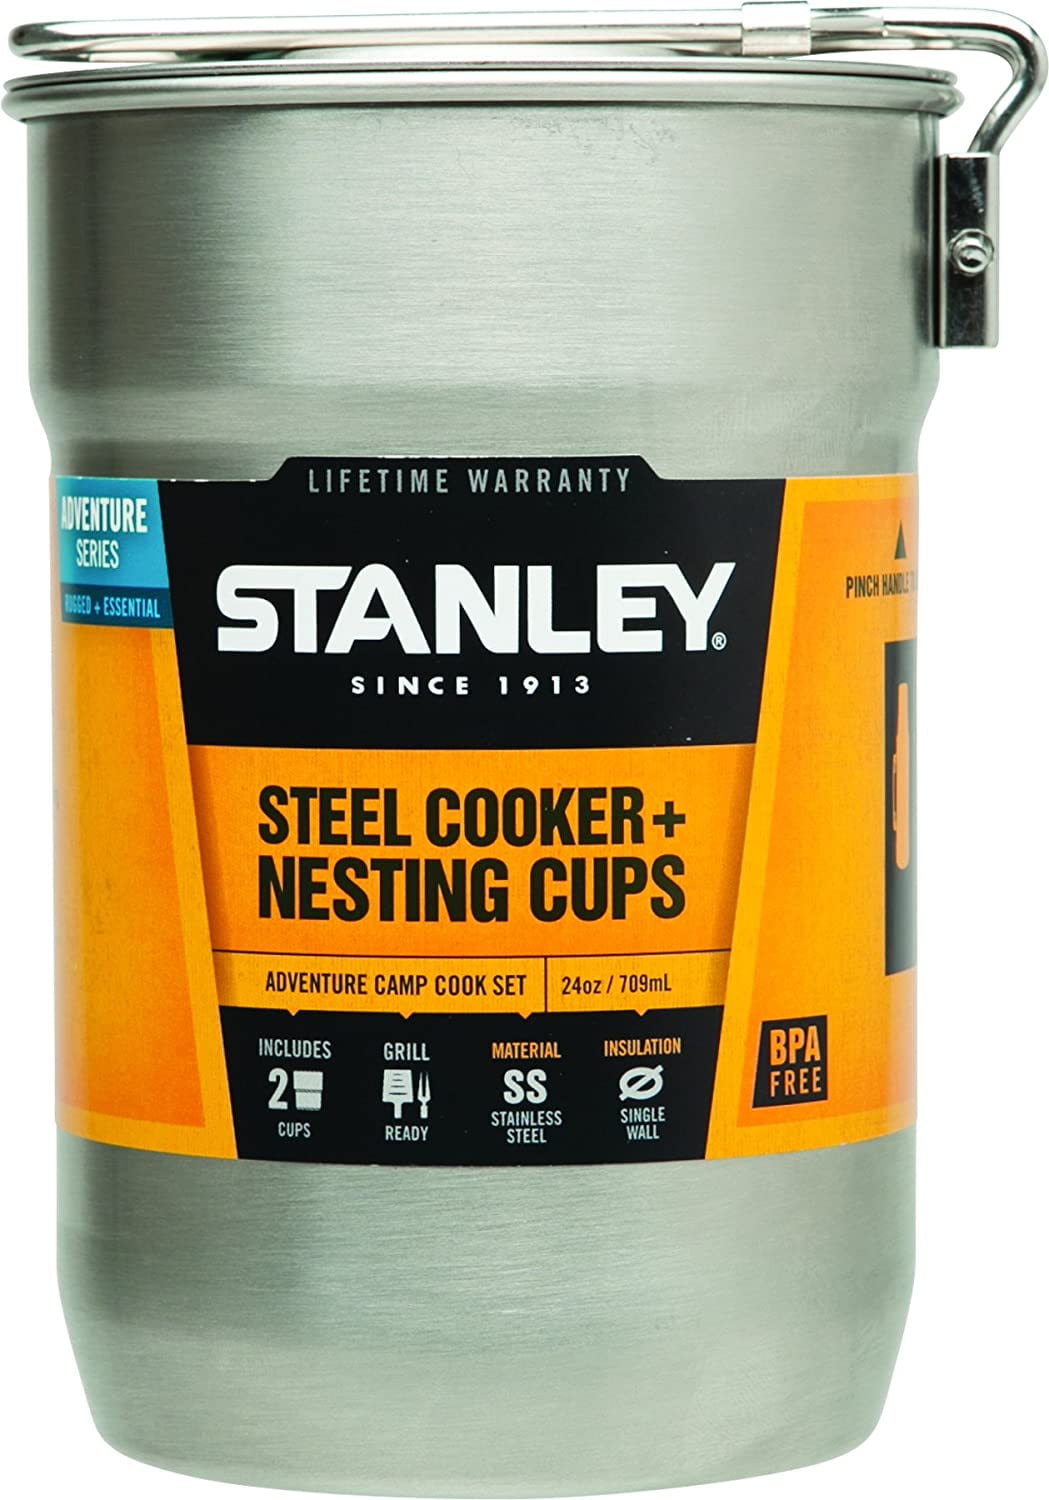 NIB STANLEY Cook Set For 2 Stainless Steel Outdoor Series Camping Hiking